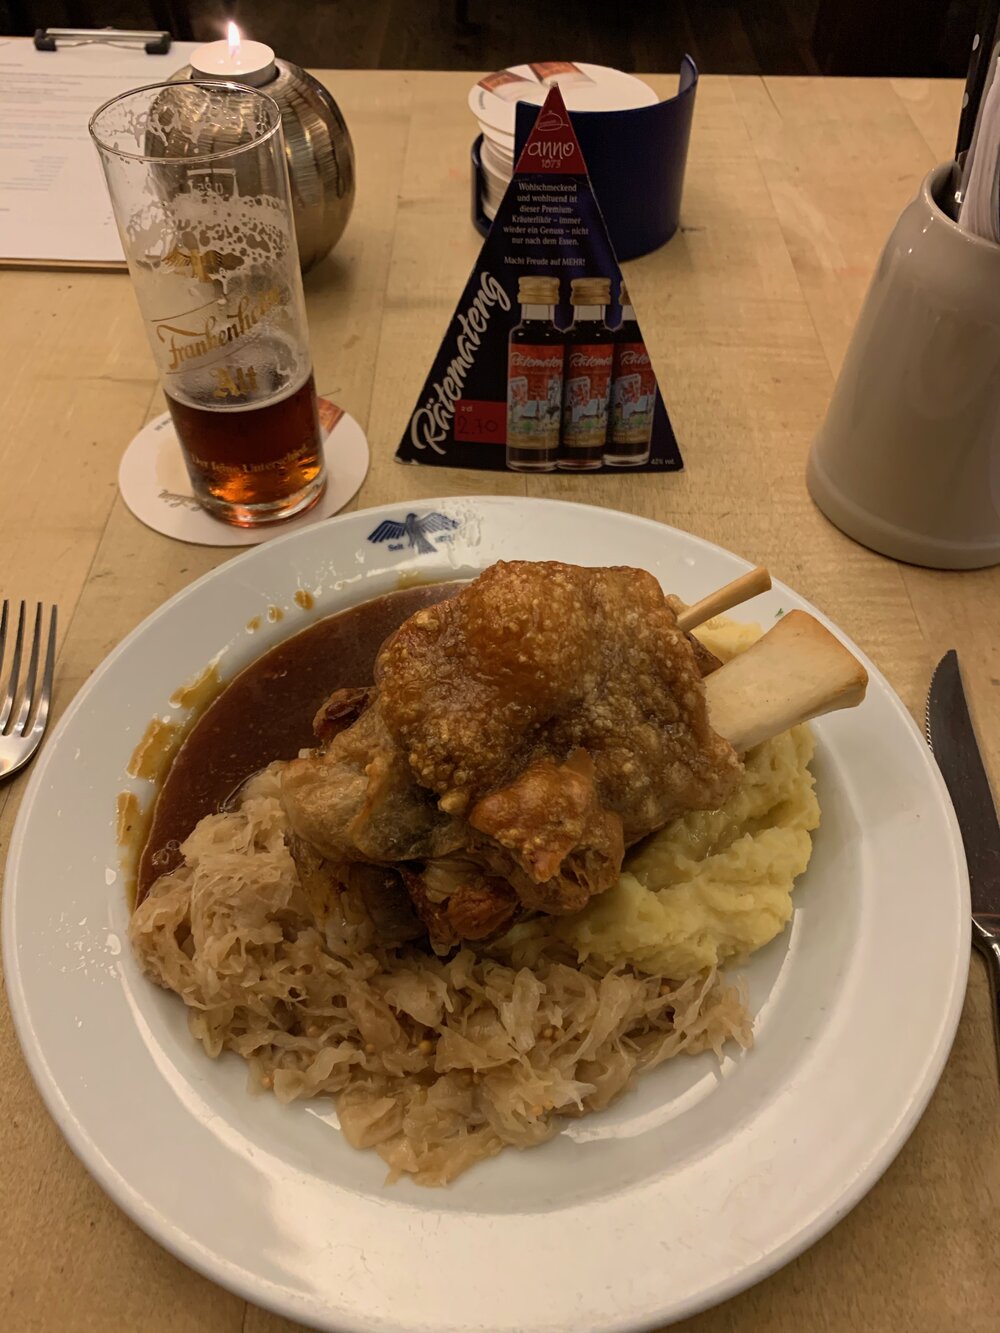   Dinner, October 16 - no trip to Dusseldorf is complete without traditional altbier and schweinshaxe!  